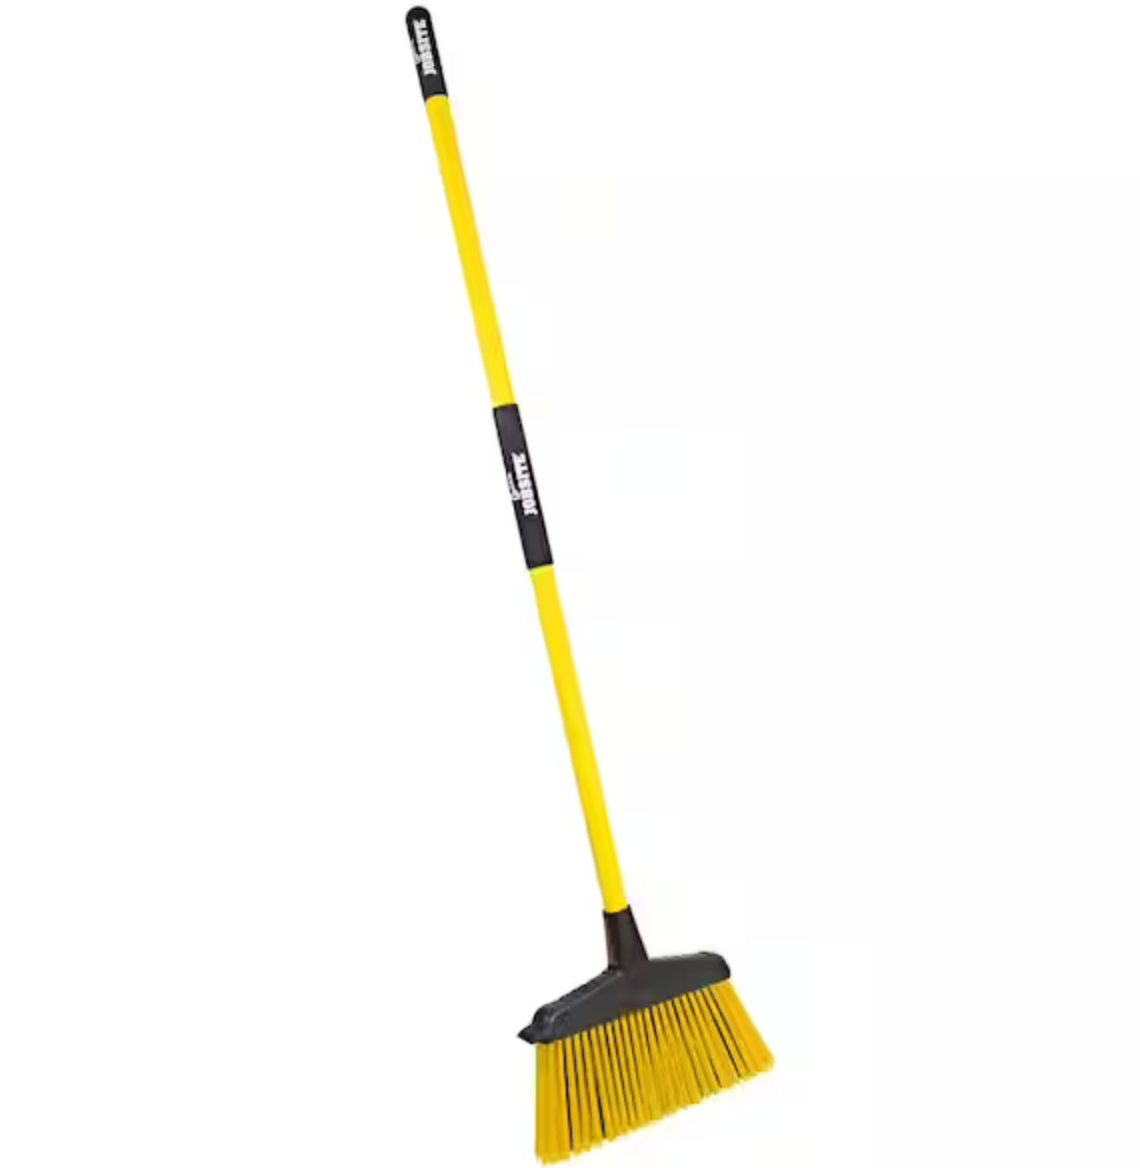 a beautiful broom in all it's glory